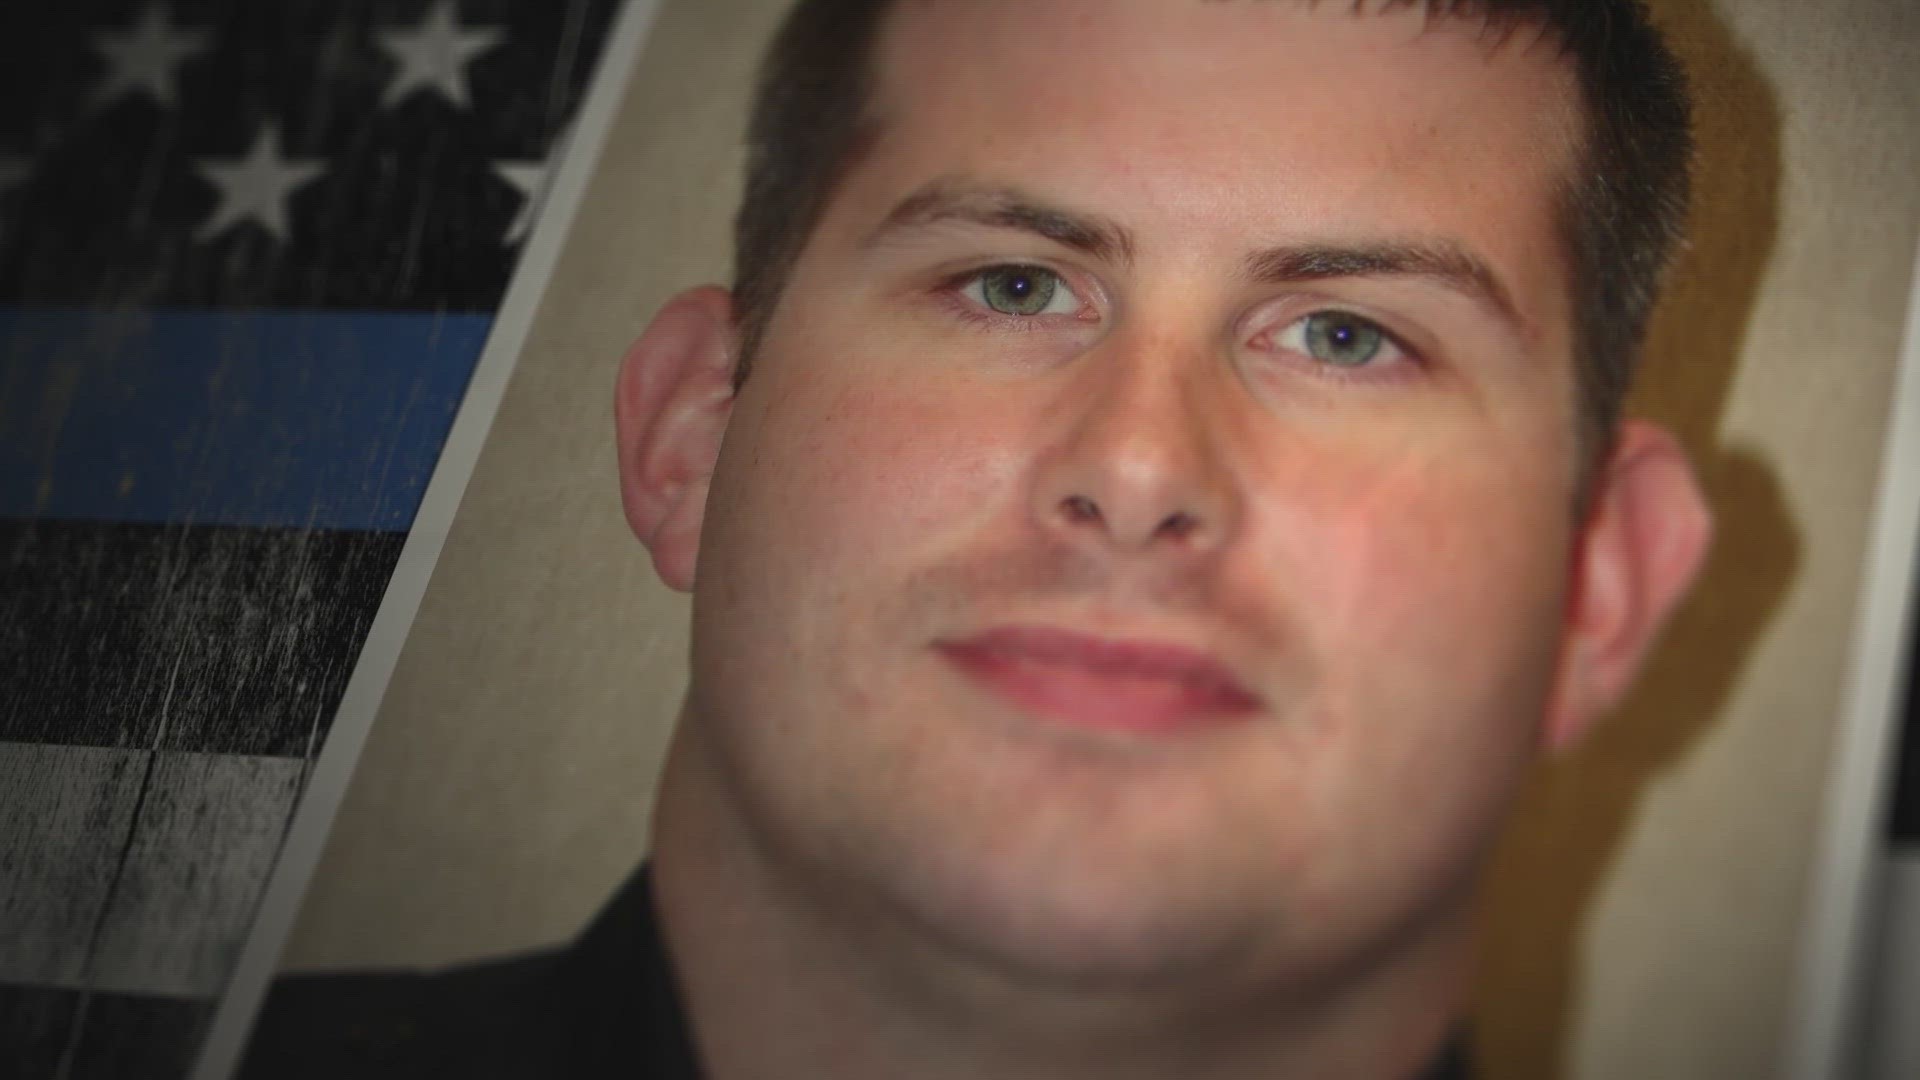 The City of Tenino announced it has placed Officer Christopher Backus on a "modified assignment" while a third-party organization conducts an internal review.